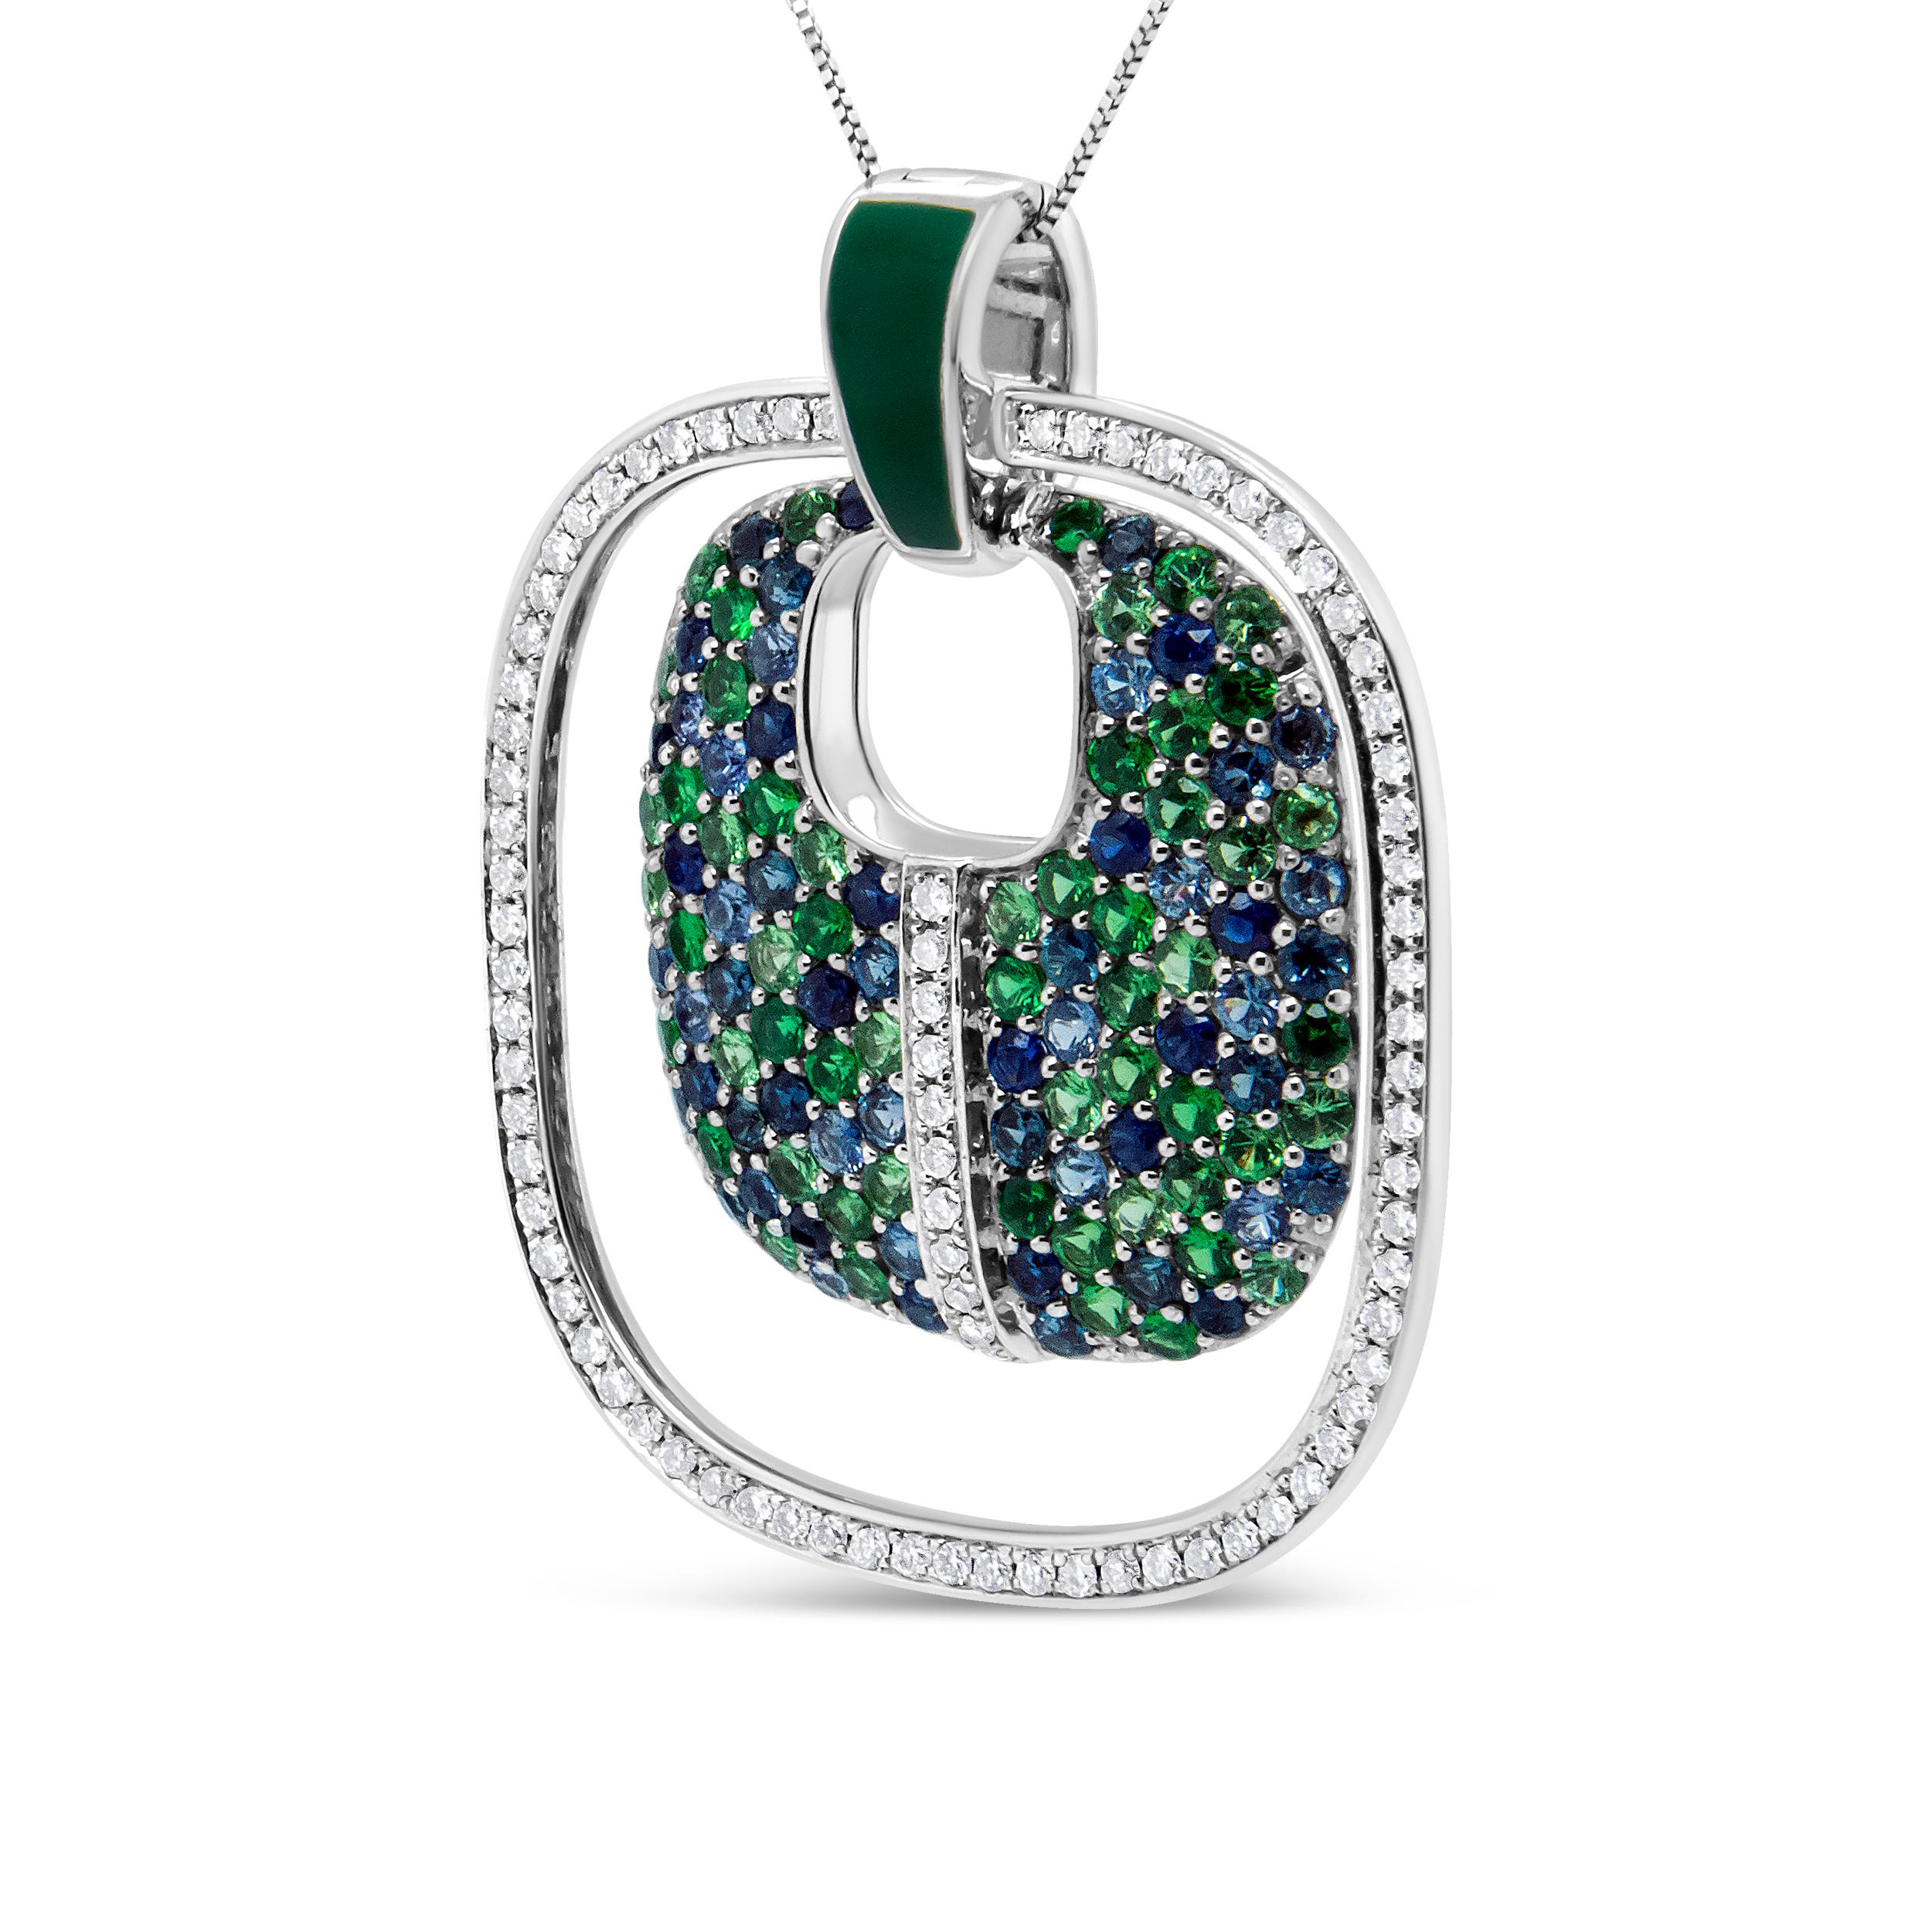 This artistically imagined statement pendant necklace  abounds with sparkling style with prong-set natural gemstones and diamonds. Crafted of .925 sterling silver with green enamel bail, this fabulous piece stands out in a unique openwork motif. A